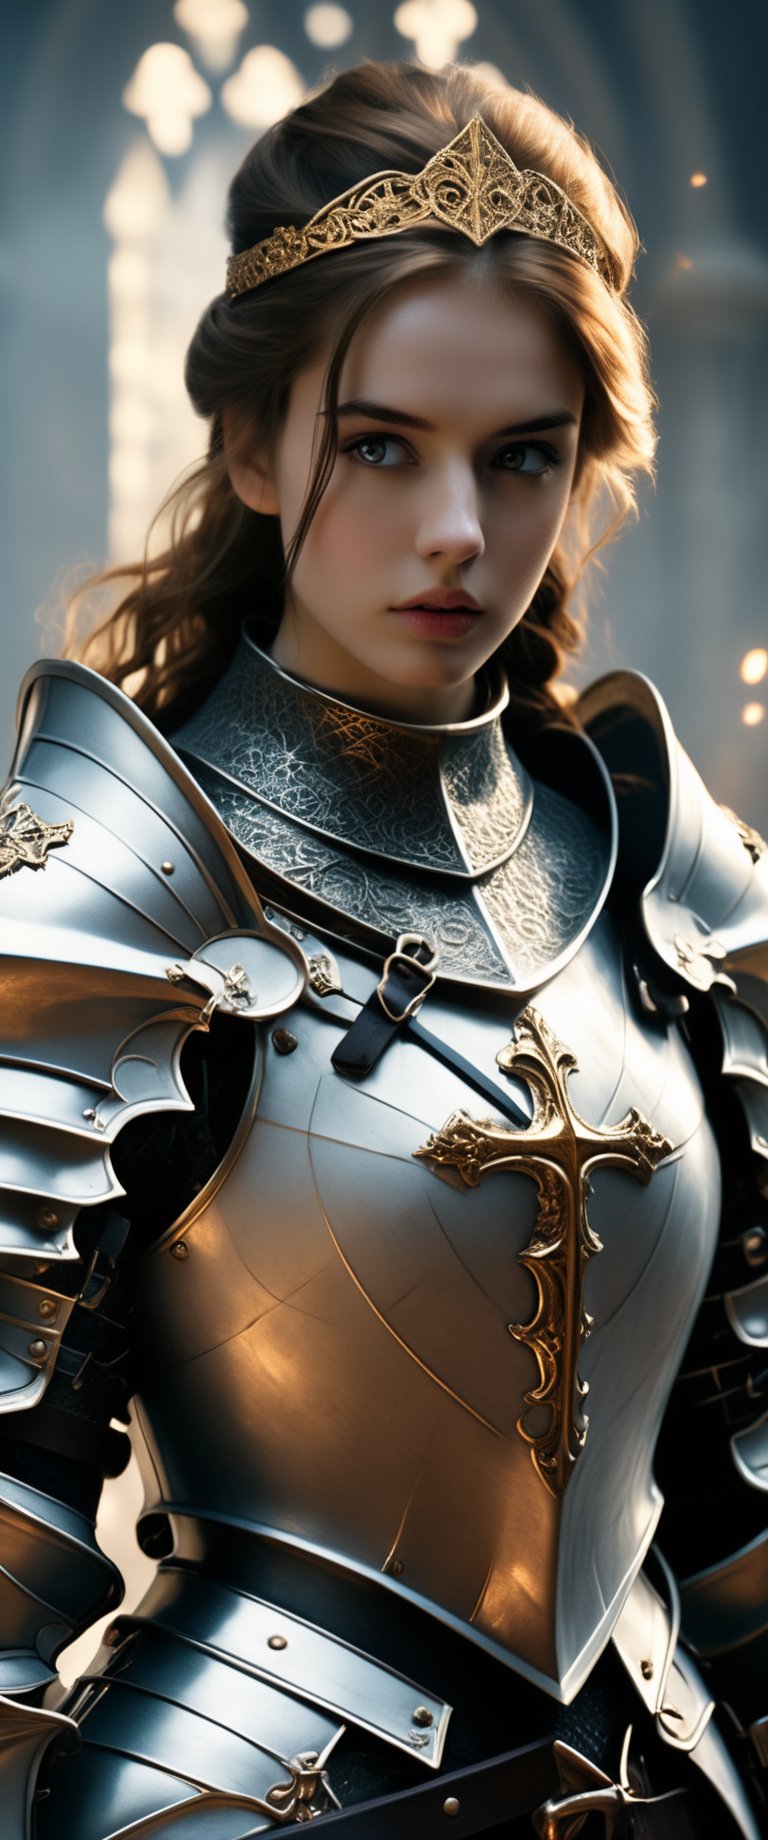 Full body. A girl wearing black armor in the ornate gothic style, pauldron, metallic collar, knight armor, golden filigree, holding sword, white glowing sword, flaming sword, battle_stance. A 17-years-old ethereal breathtakingly glamorous  girl, , hairband, slim and tall perfect model body, An ethereal beautiful face with v-shaped jawline, bright eyes, almond-shaped eyes, translucent skin texture, porcelain skin tone. Adorned with christian symbols accentuating her high status as an inquisitor. The best warrior of inquisition. award-winning, hyperrealistic:1.2, realistic, raw photo, warrior, photo_b00ster, glowing sword, ct-fujiii, ct-eujiiin,Movie Still,Cinematic ,more detail XL,ct-jeniiii